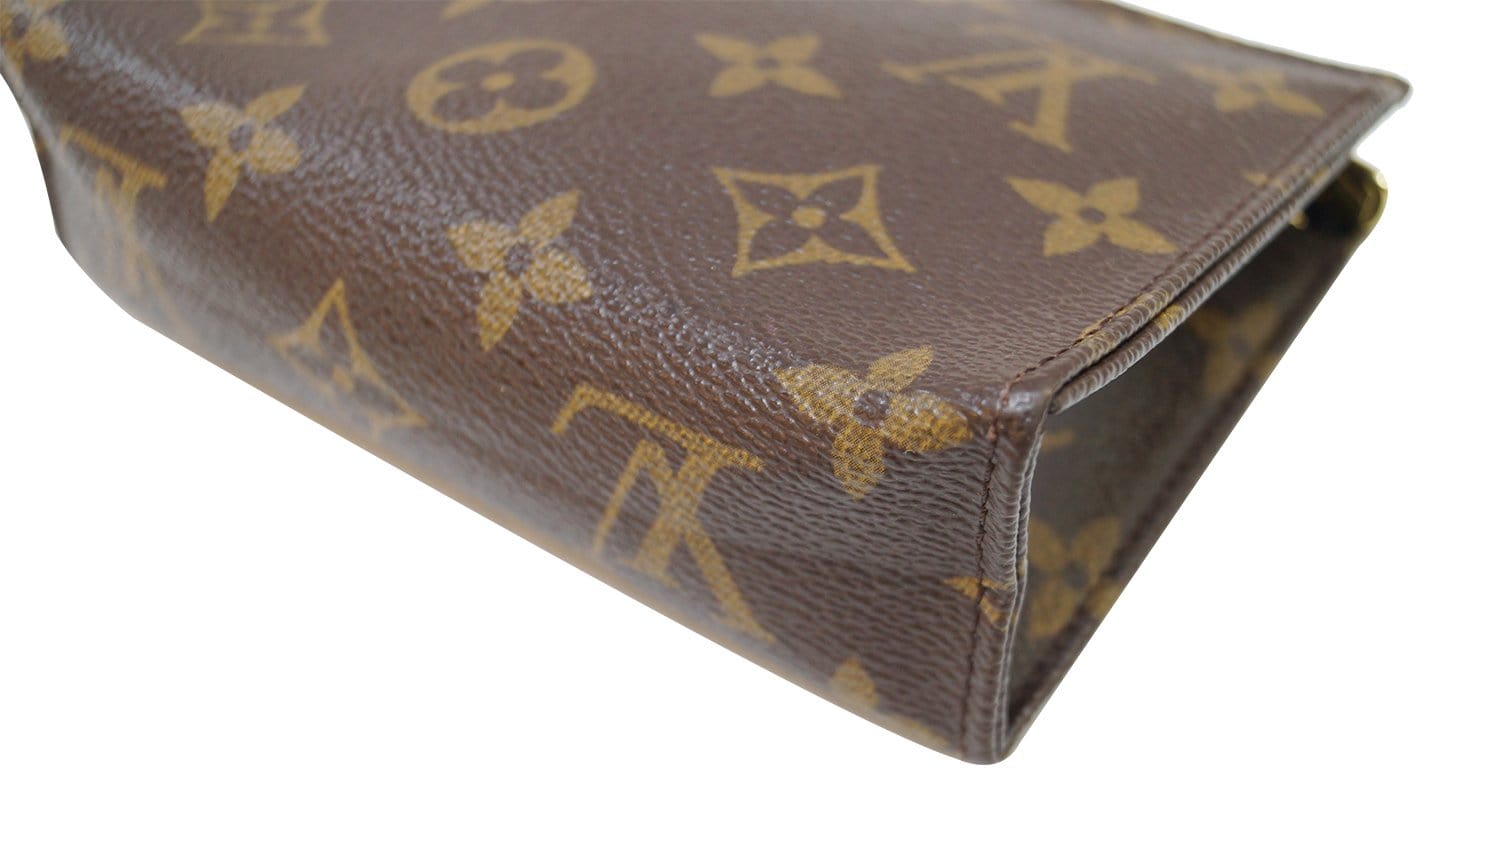 Buy Authentic Pre-owned Louis Vuitton Monogram Poche Toilette 15 Cosmetic  Case Pm Bag M47546 220015 from Japan - Buy authentic Plus exclusive items  from Japan